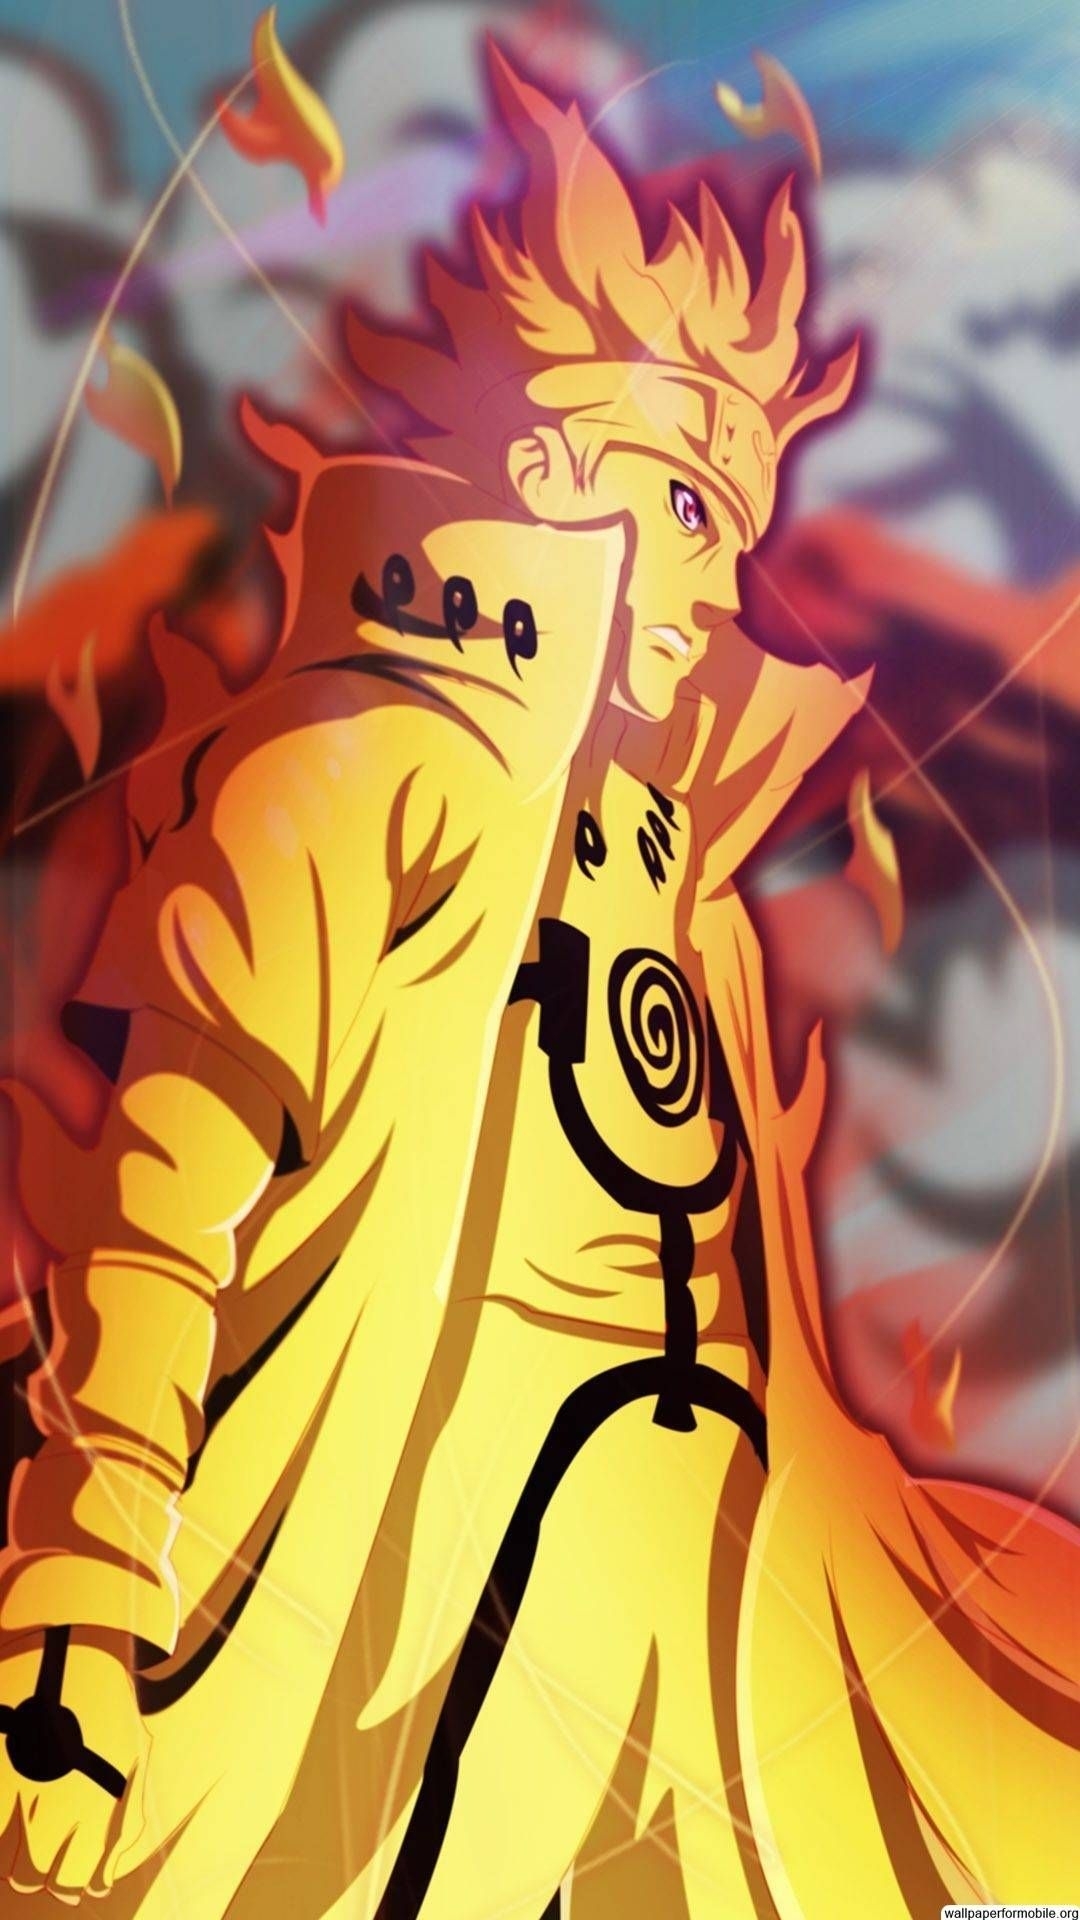 10 New Naruto Wallpaper For Android FULL HD 1920×1080 For PC Background